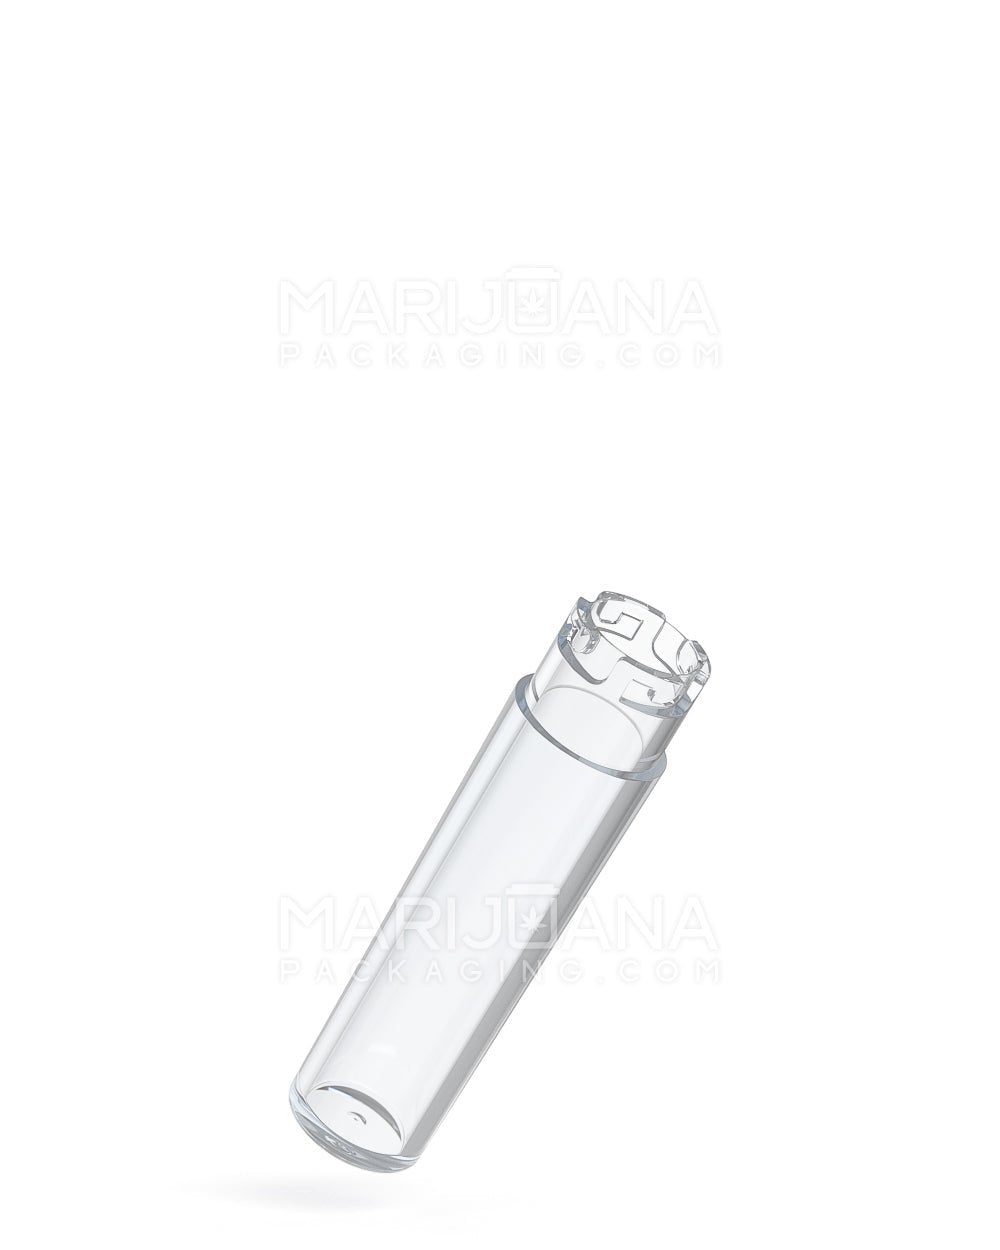 POLLEN GEAR Five10 Child Resistant Push Down & Turn Wide Short Universal Plastic Caps for Vape Tube | 120mm - Clear | Sample - 1